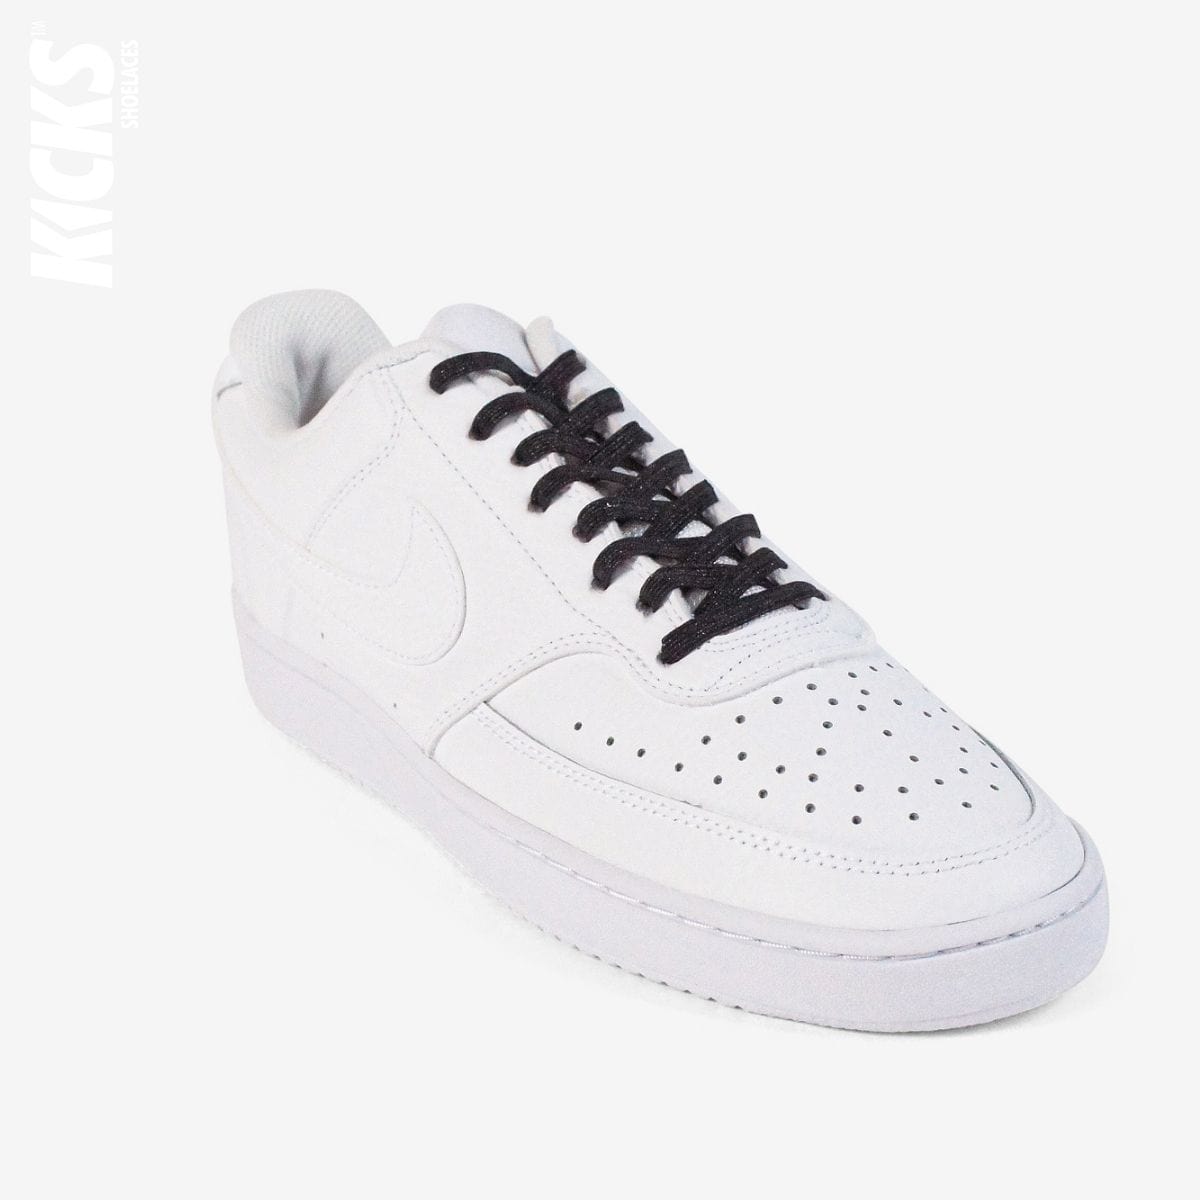 elastic-no-tie-shoelaces-with-black-laces-on-nike-white-sneakers